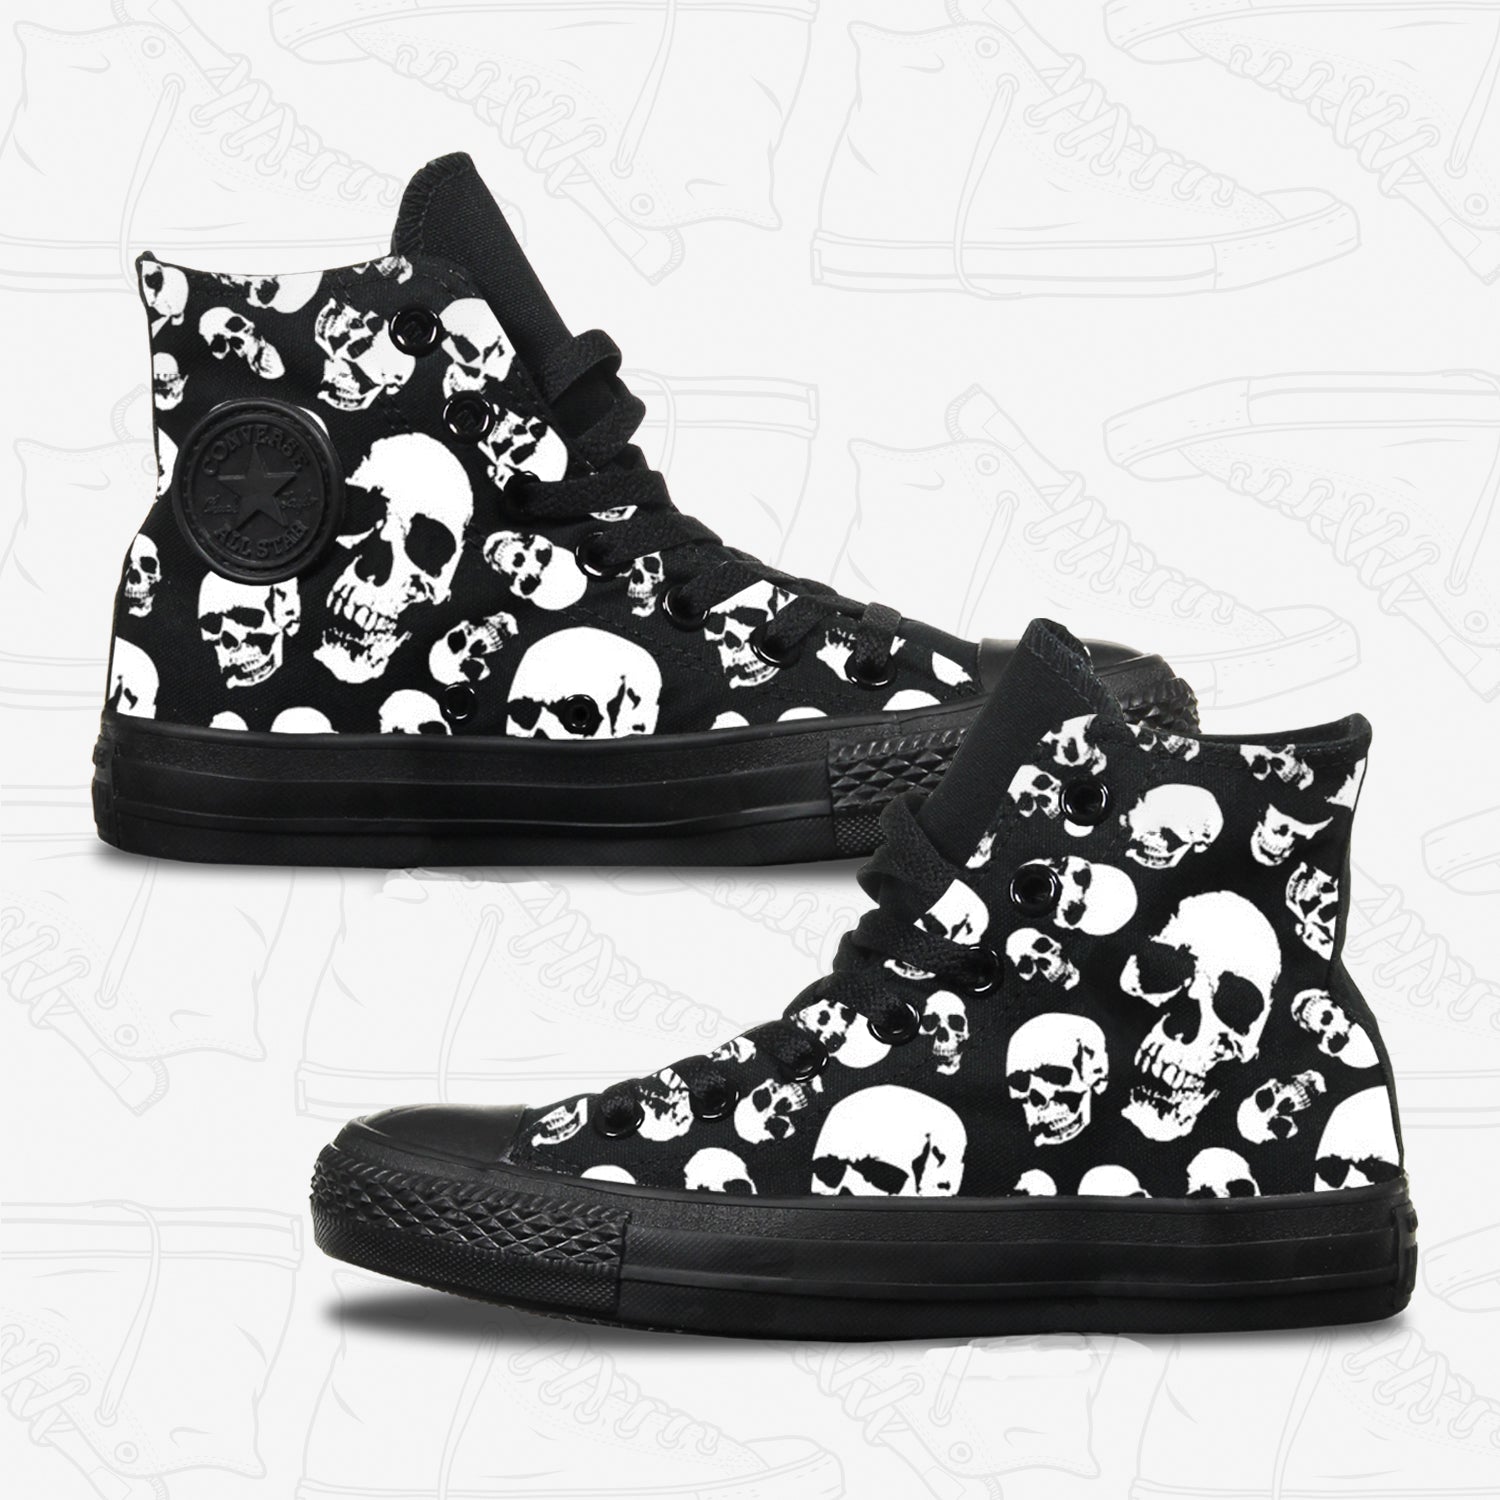 converse with skulls on them